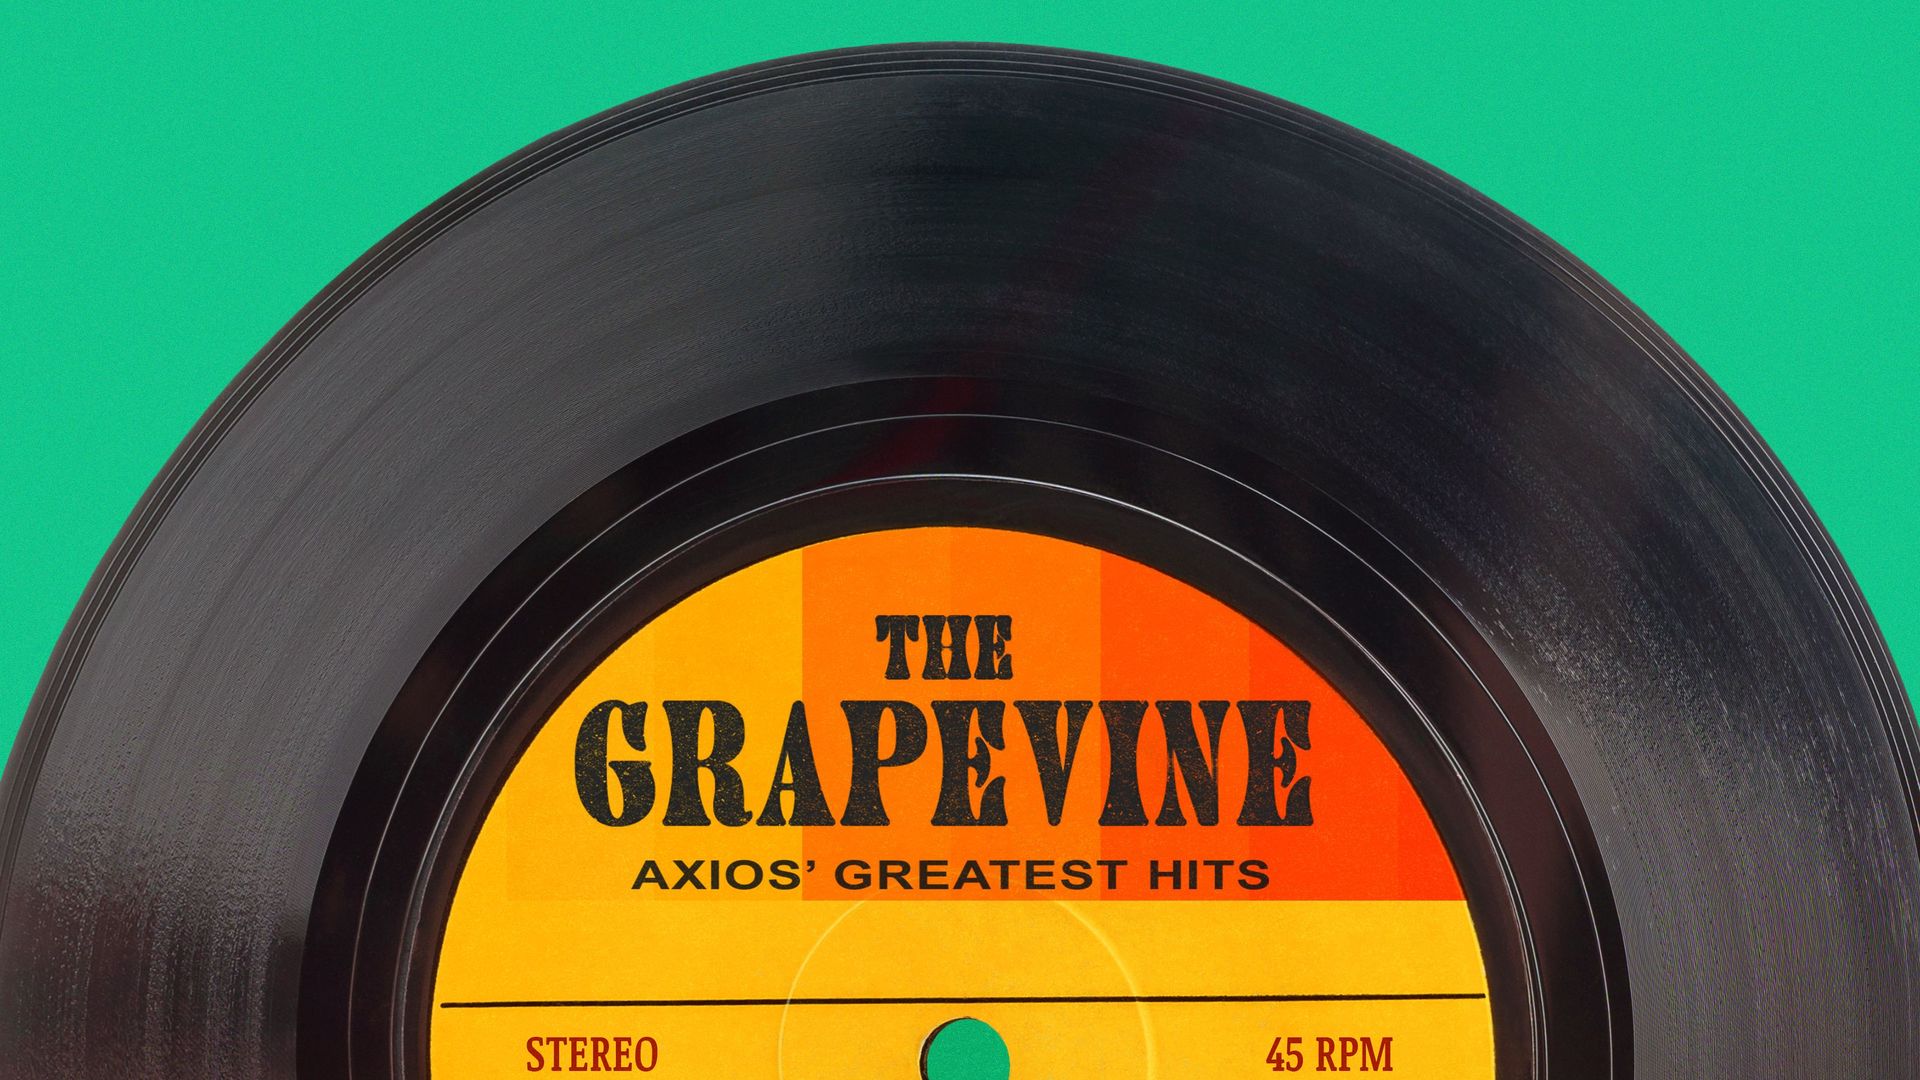 Illustration of a vinyl record that says "The Grapevine."